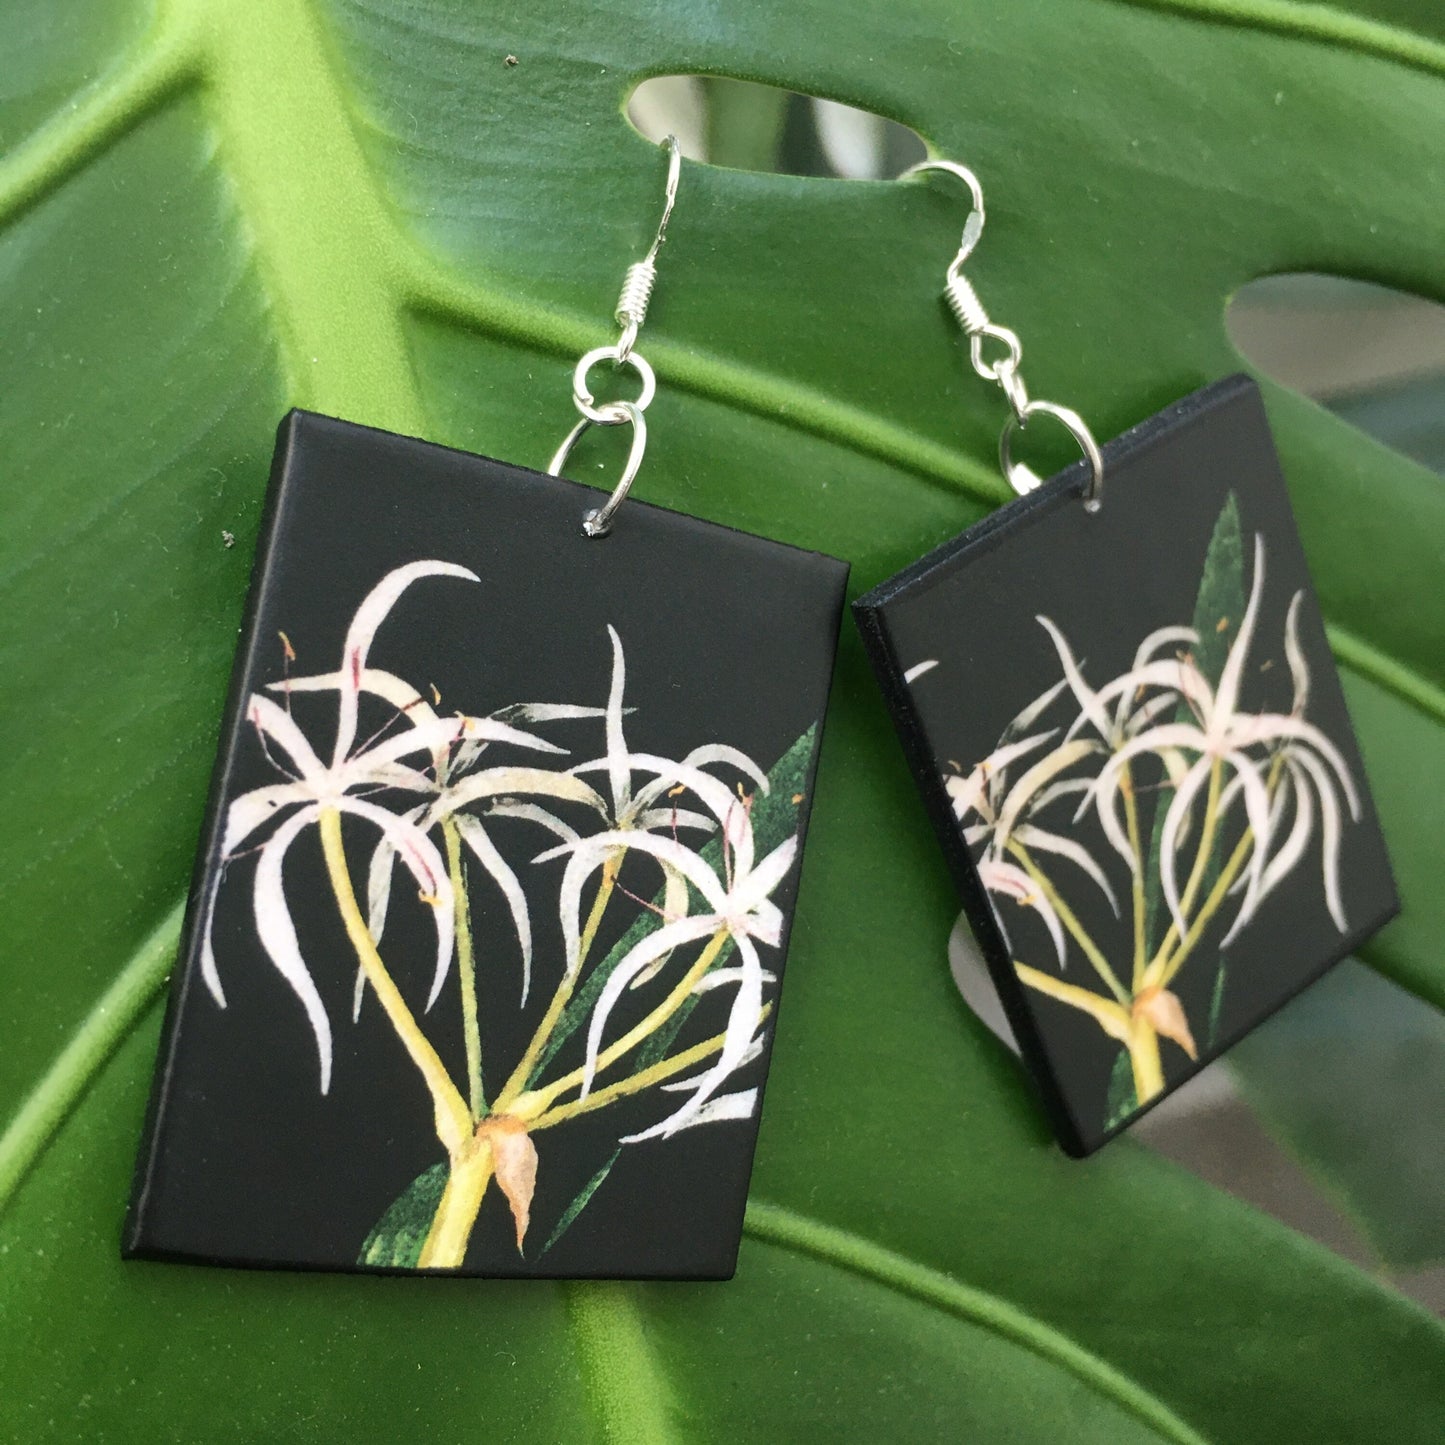 Mary Delany white flowers earrings. Mother day gift